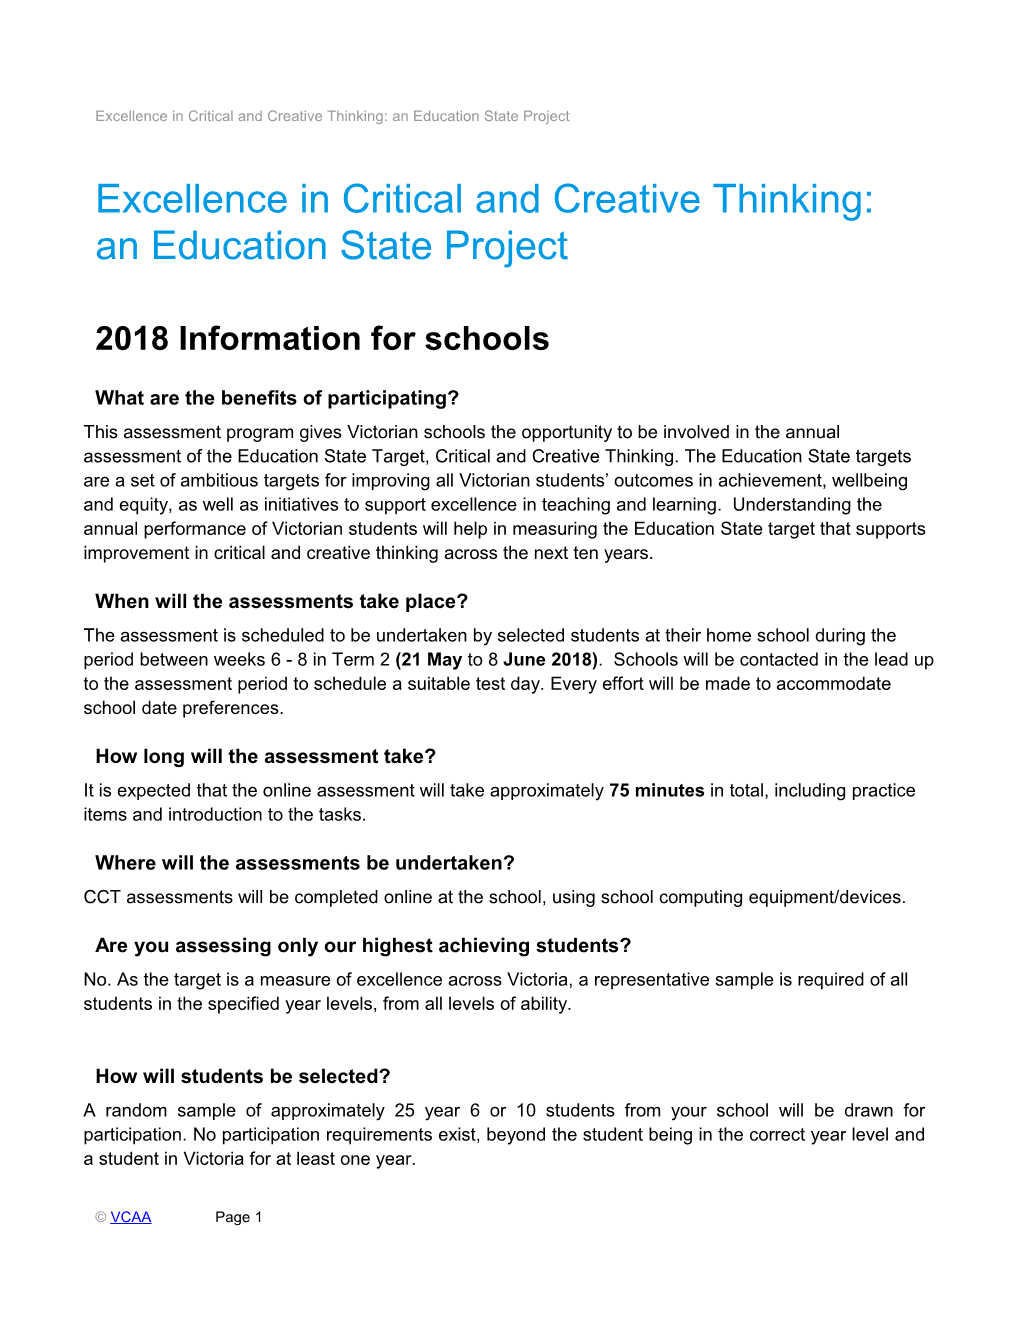 Excellence in Critical and Creative Thinking: an Education State Project